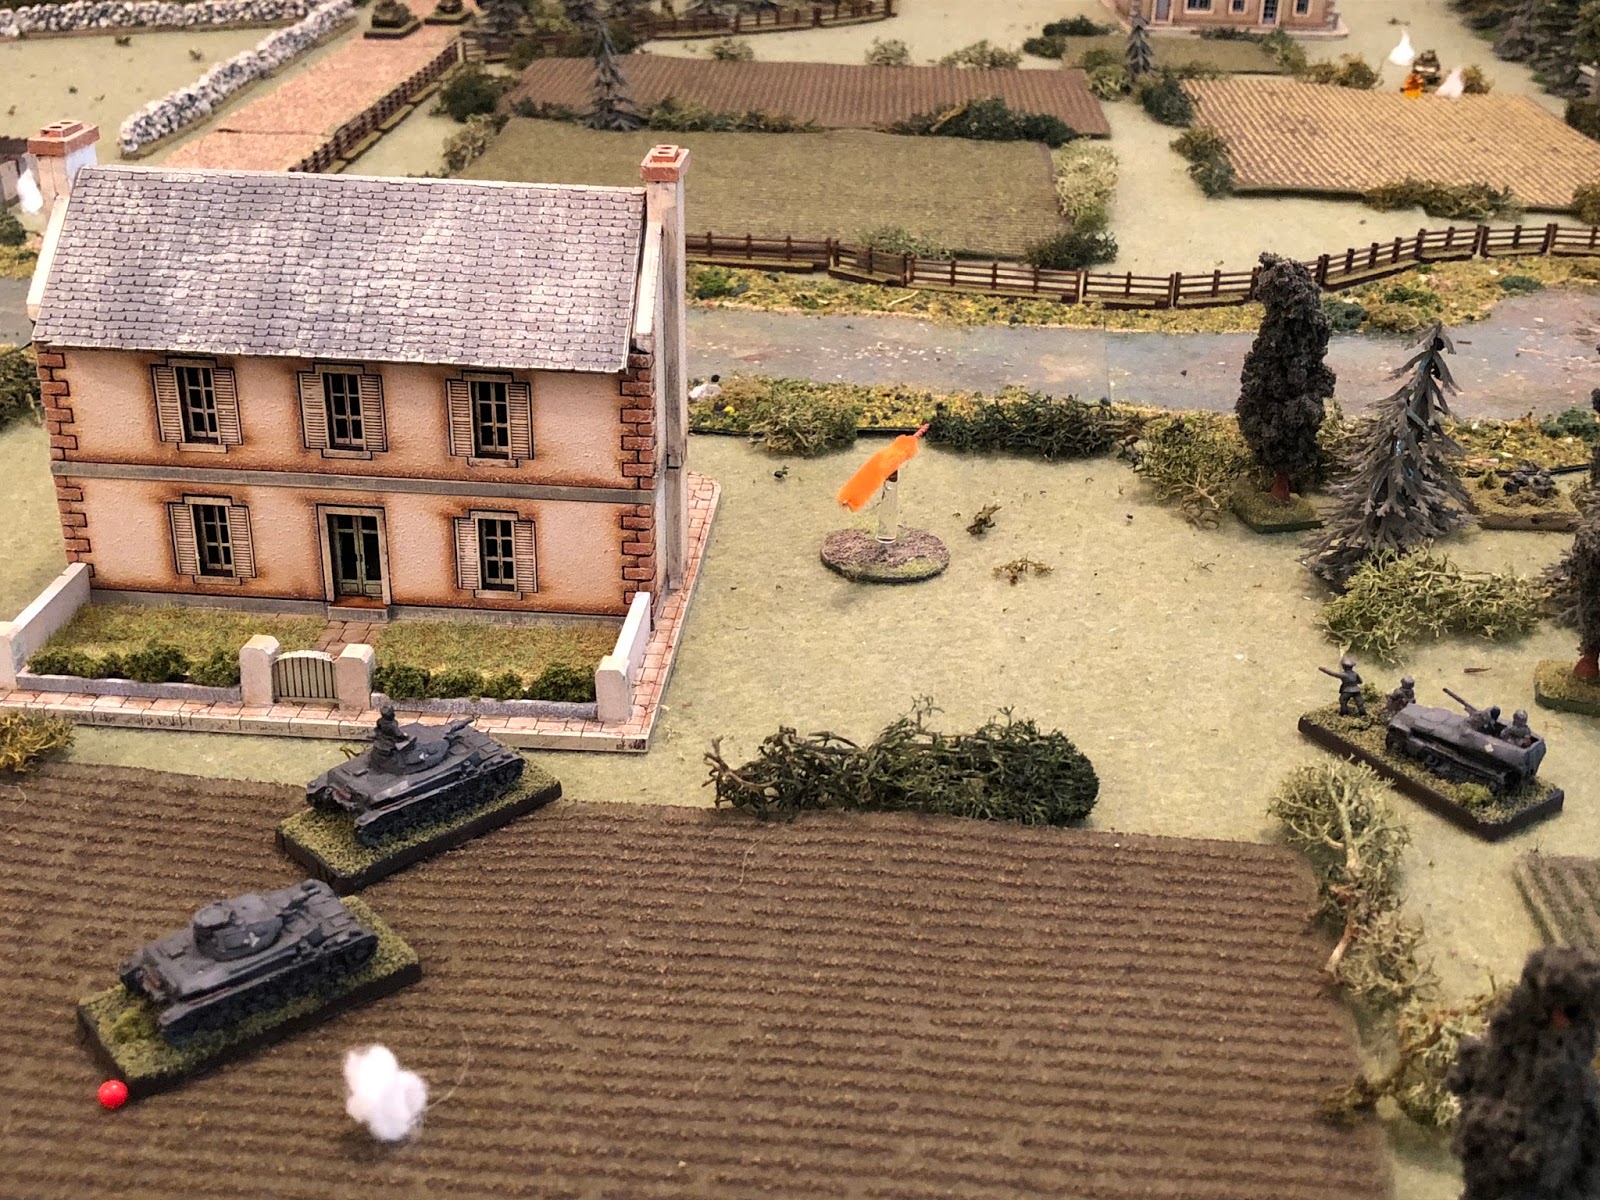  The German Commander, Lt Wehner (far right), looks on as Sgt Graebner's vehicle (left) trades shots with the northern Somua (top right), as Sgt Kapps (bottom left) tries to rally his shaken up crew... 